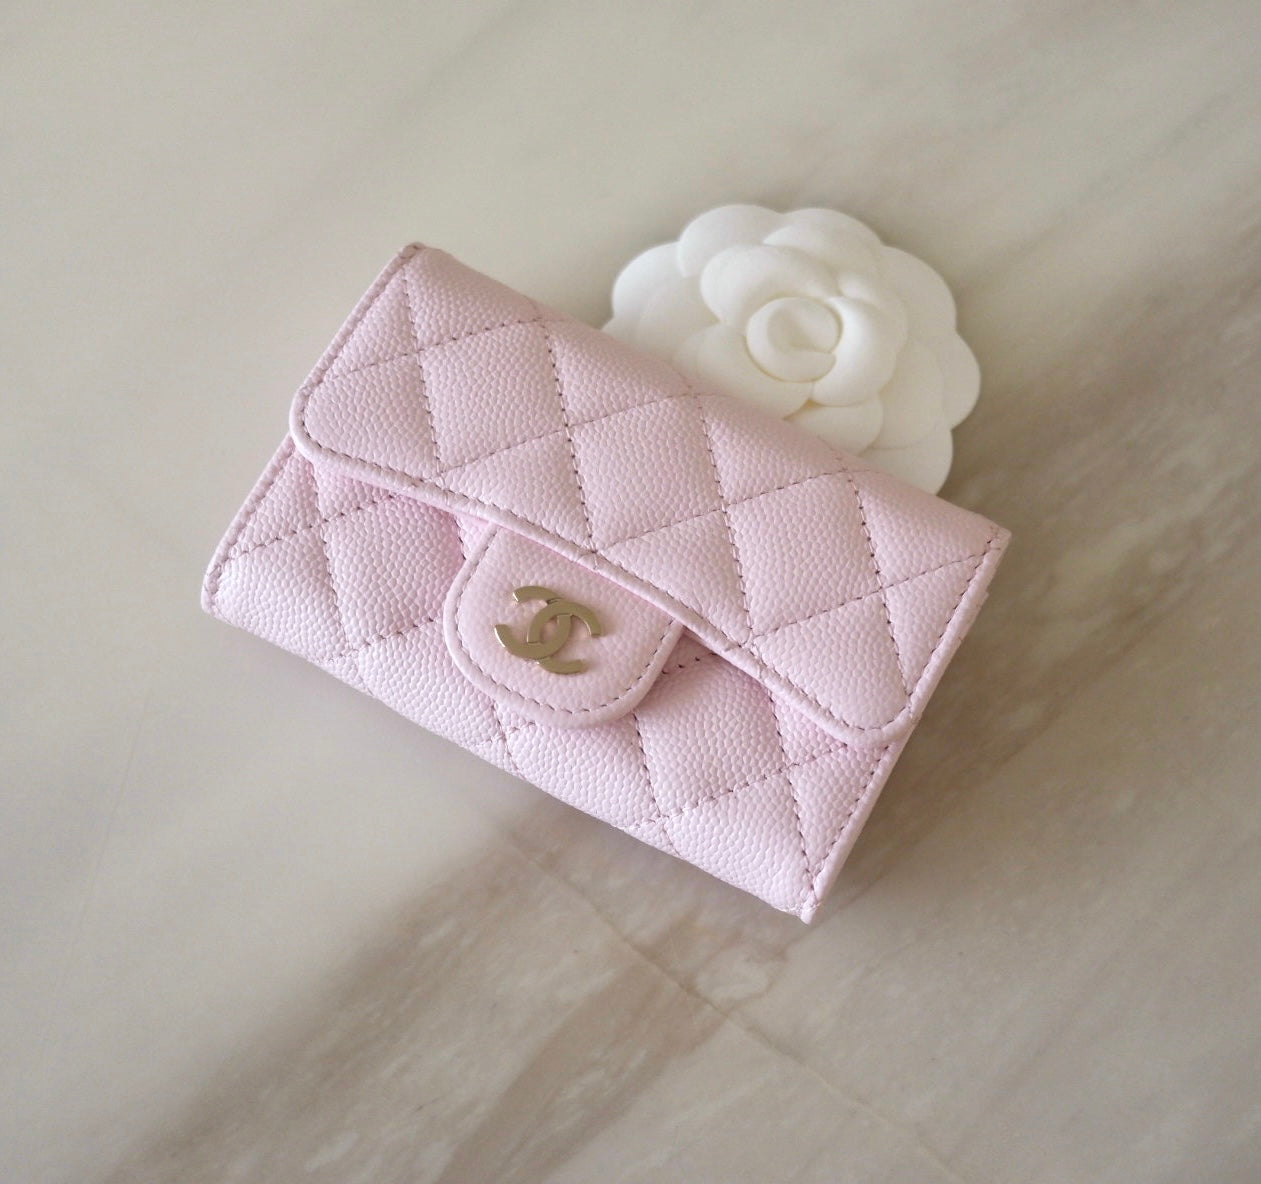 CHANEL PINK LEATHER CLASSIC CARD HOLDER